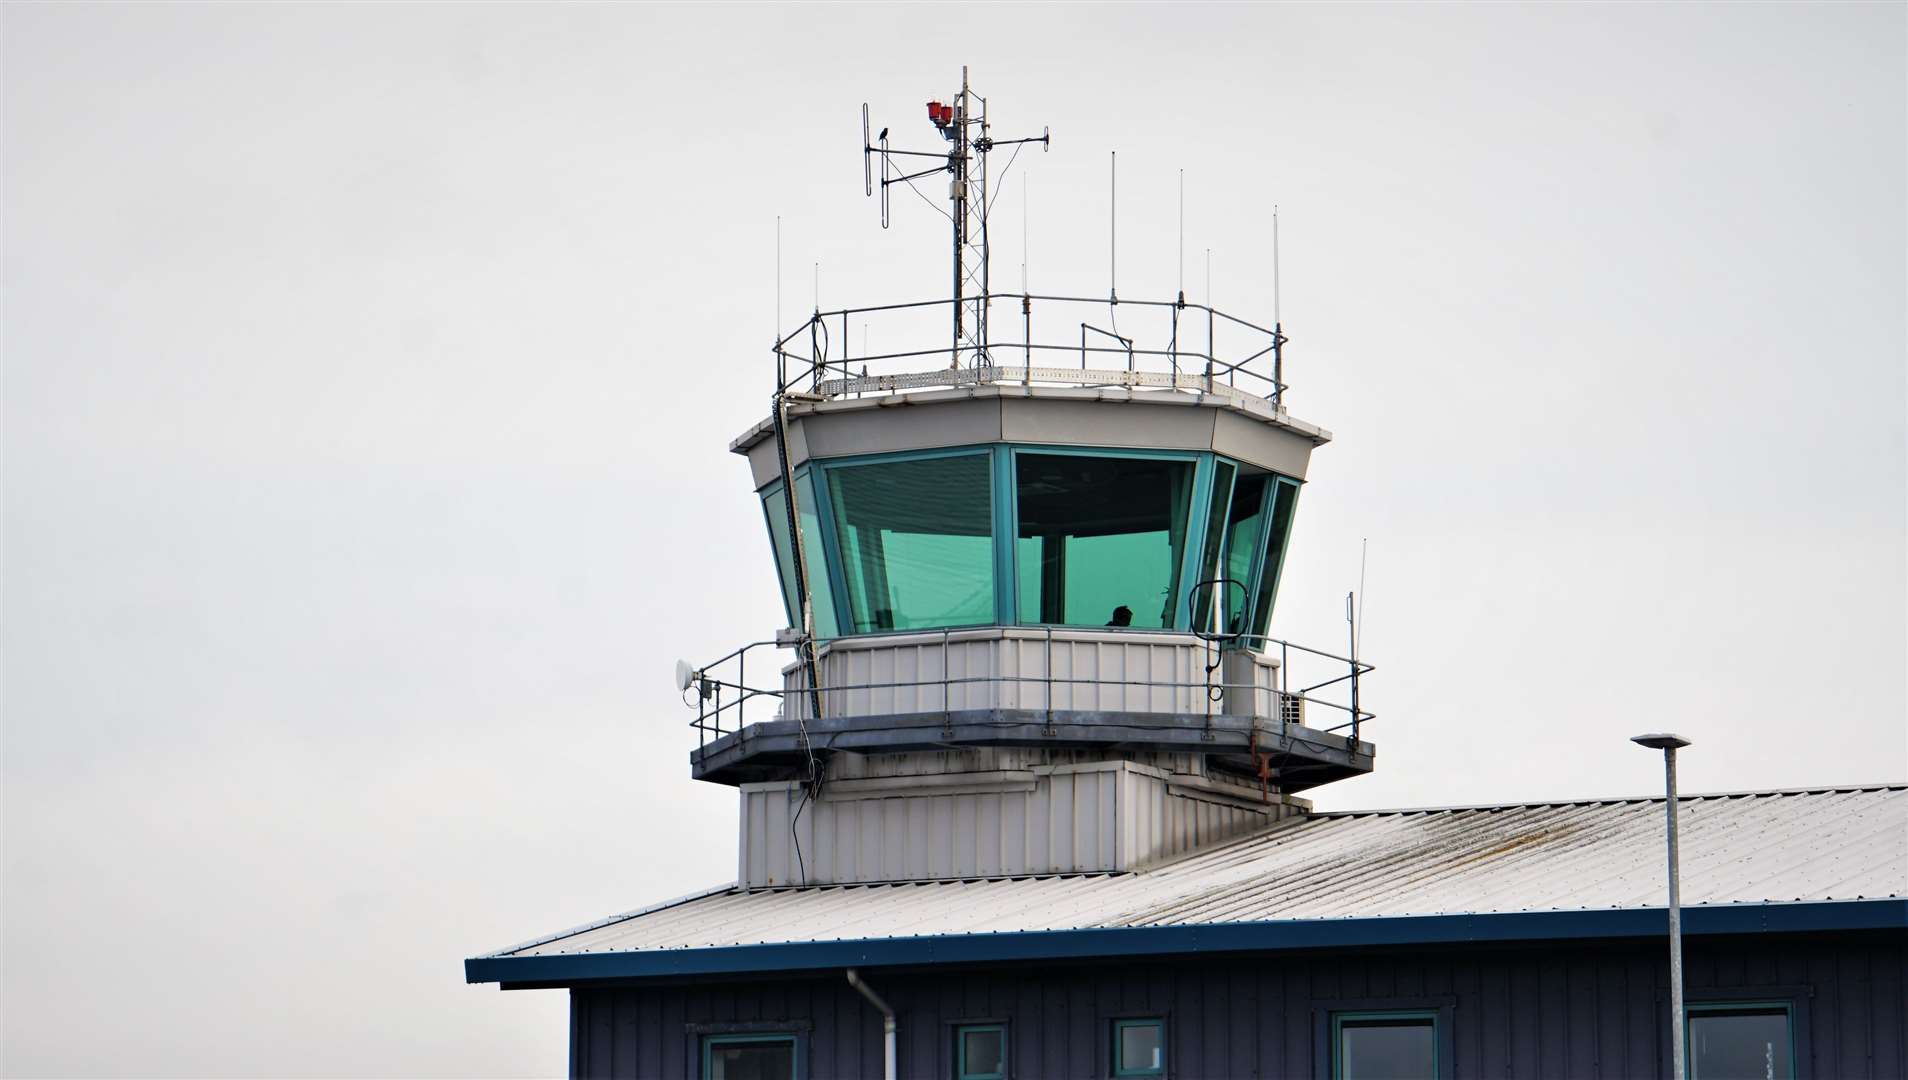 A new working group will discuss the future service delivery options for Wick John O'Groats Airport.